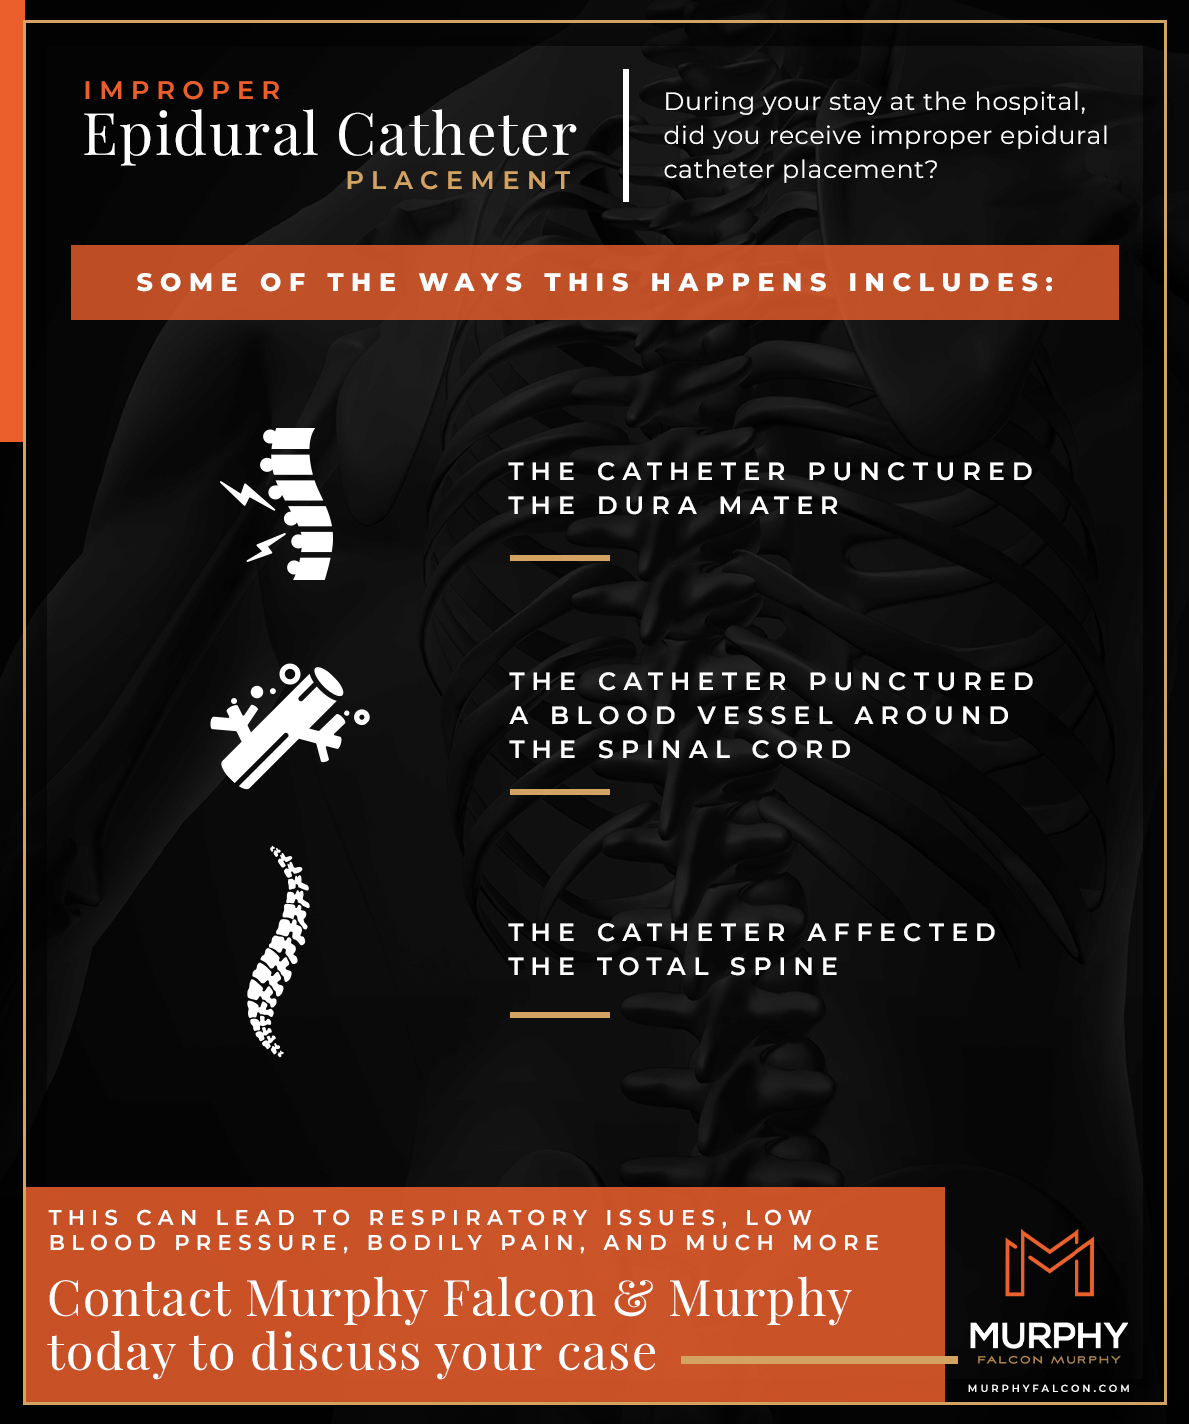 An infographic describing how an Improper Epidural Catheter Placement can harm someone.